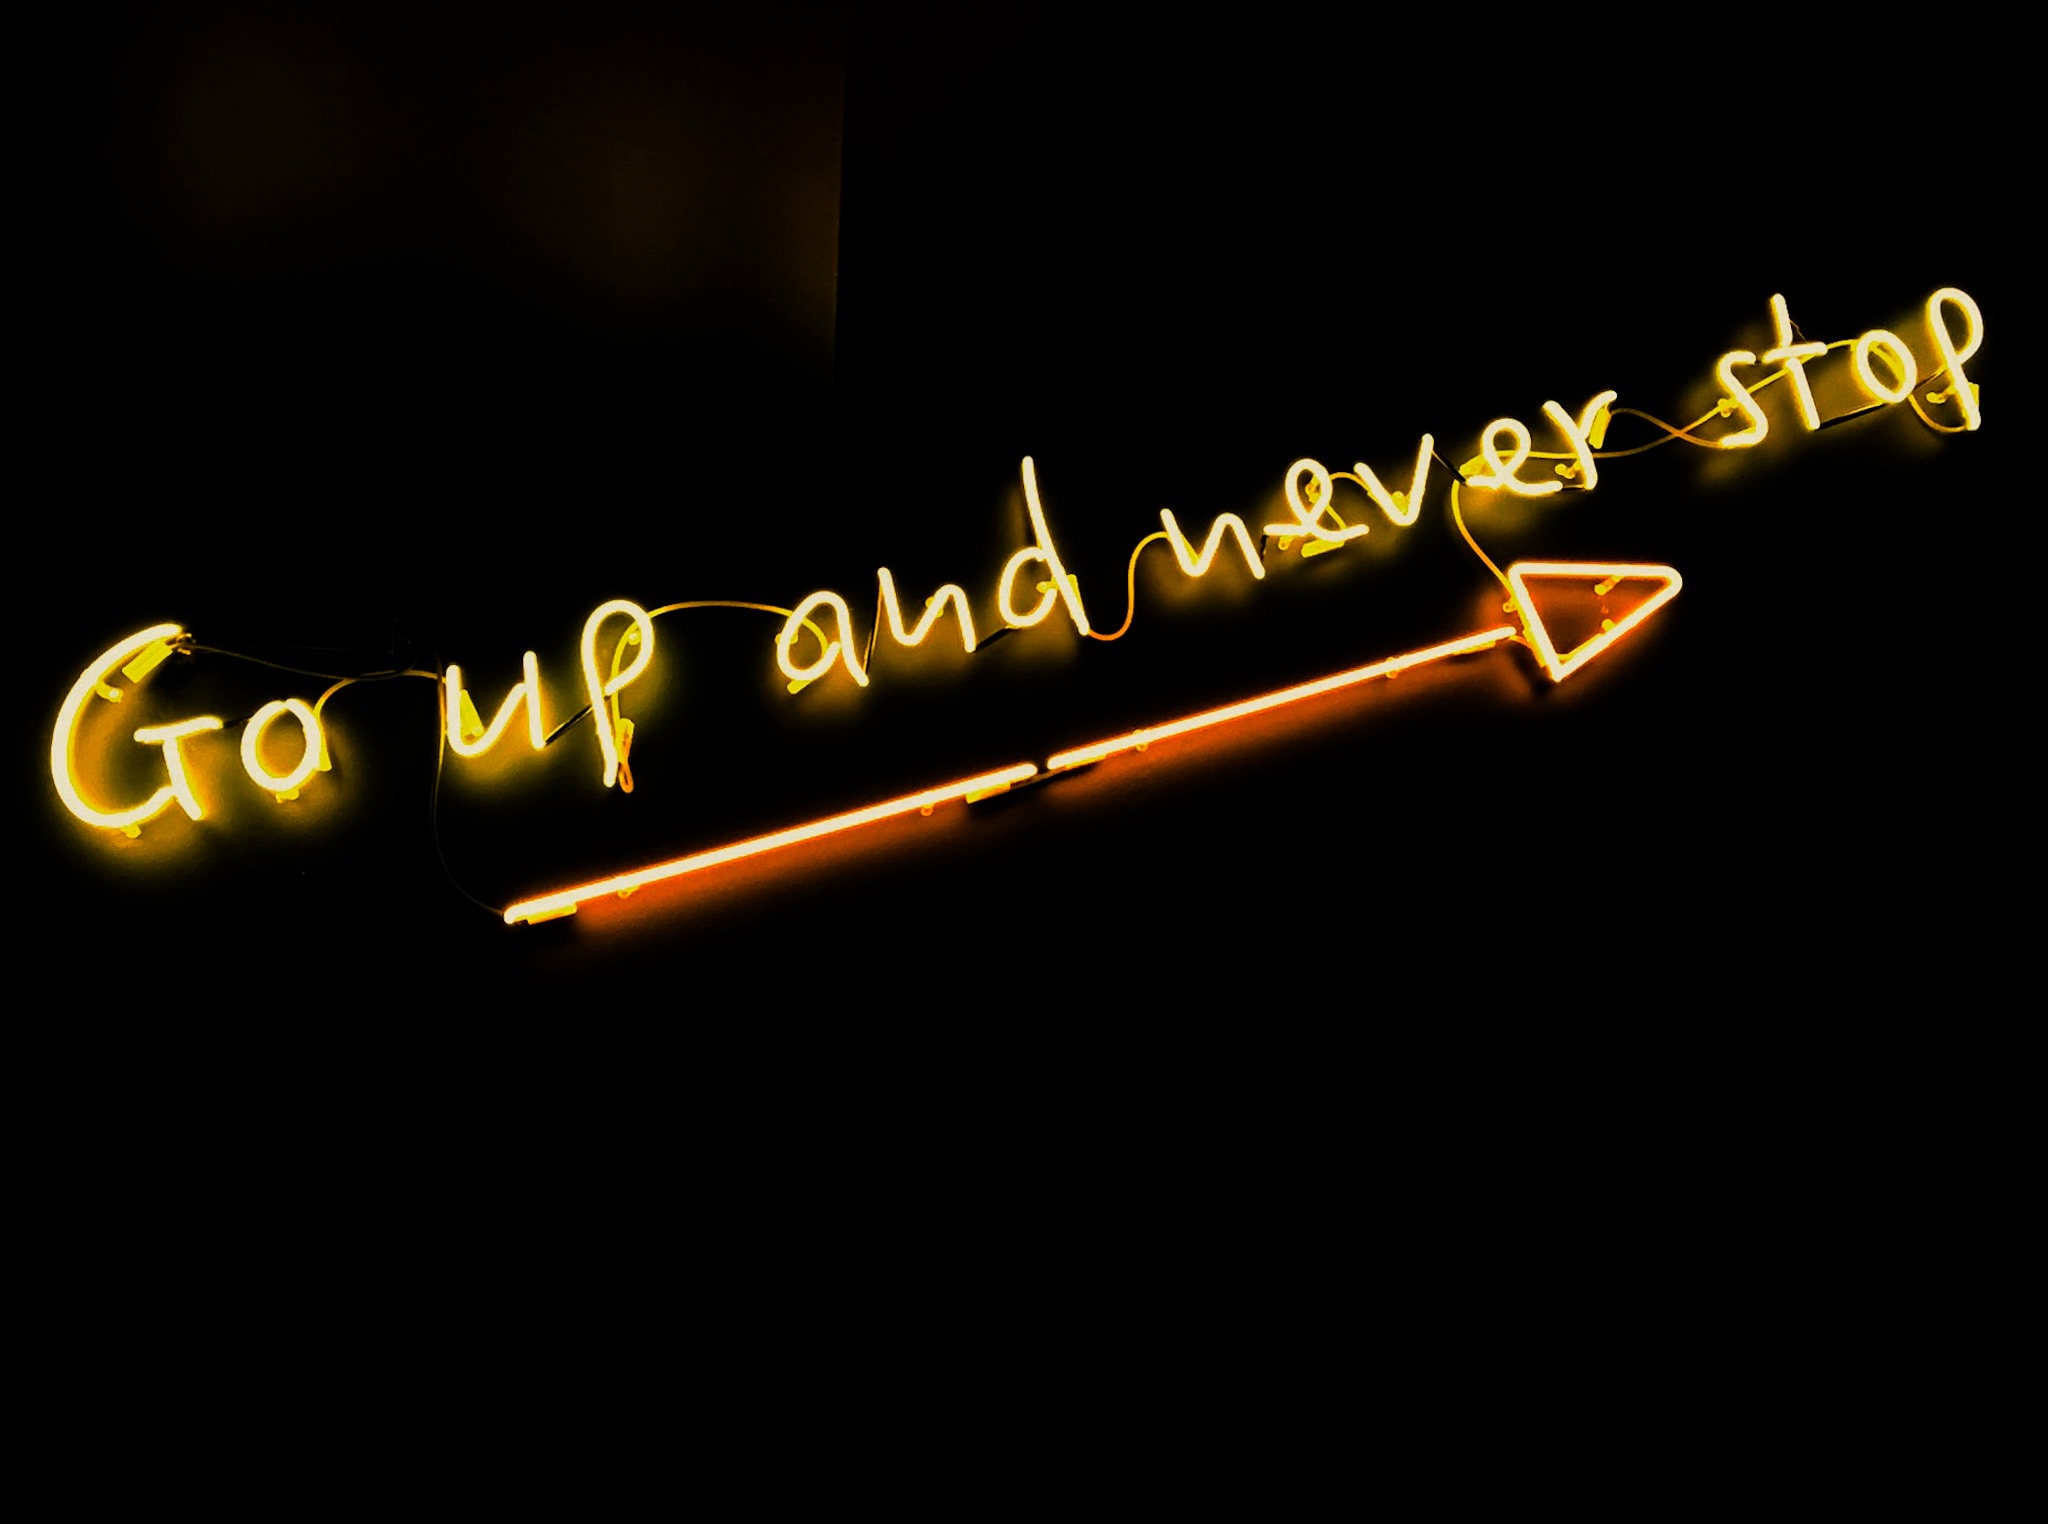 neon sign that reads "Go up and never stop" in reference to addiction recovery